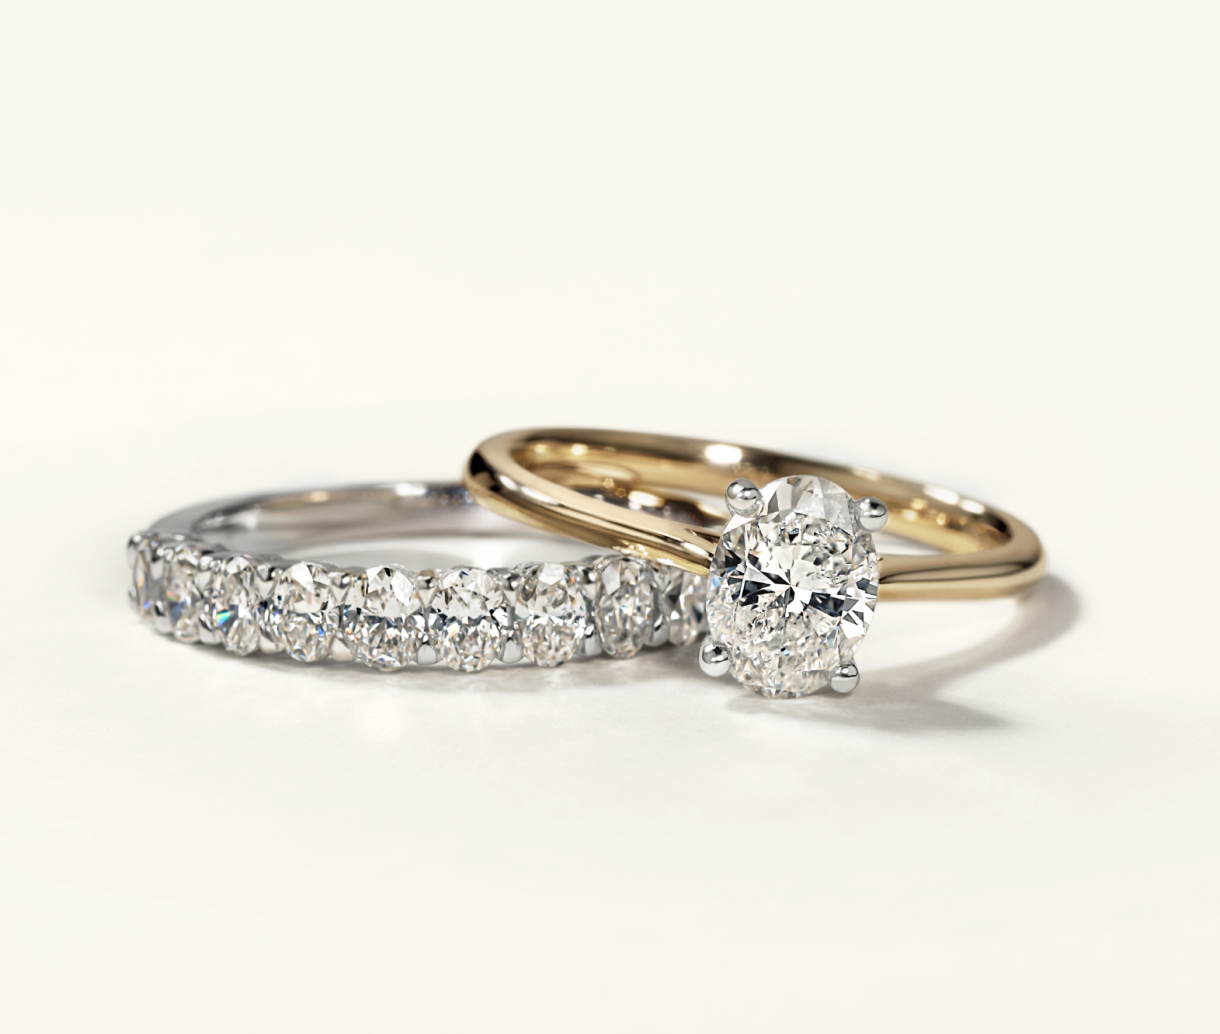 Do you wear your engagement ring on your wedding day? - Shining Diamonds